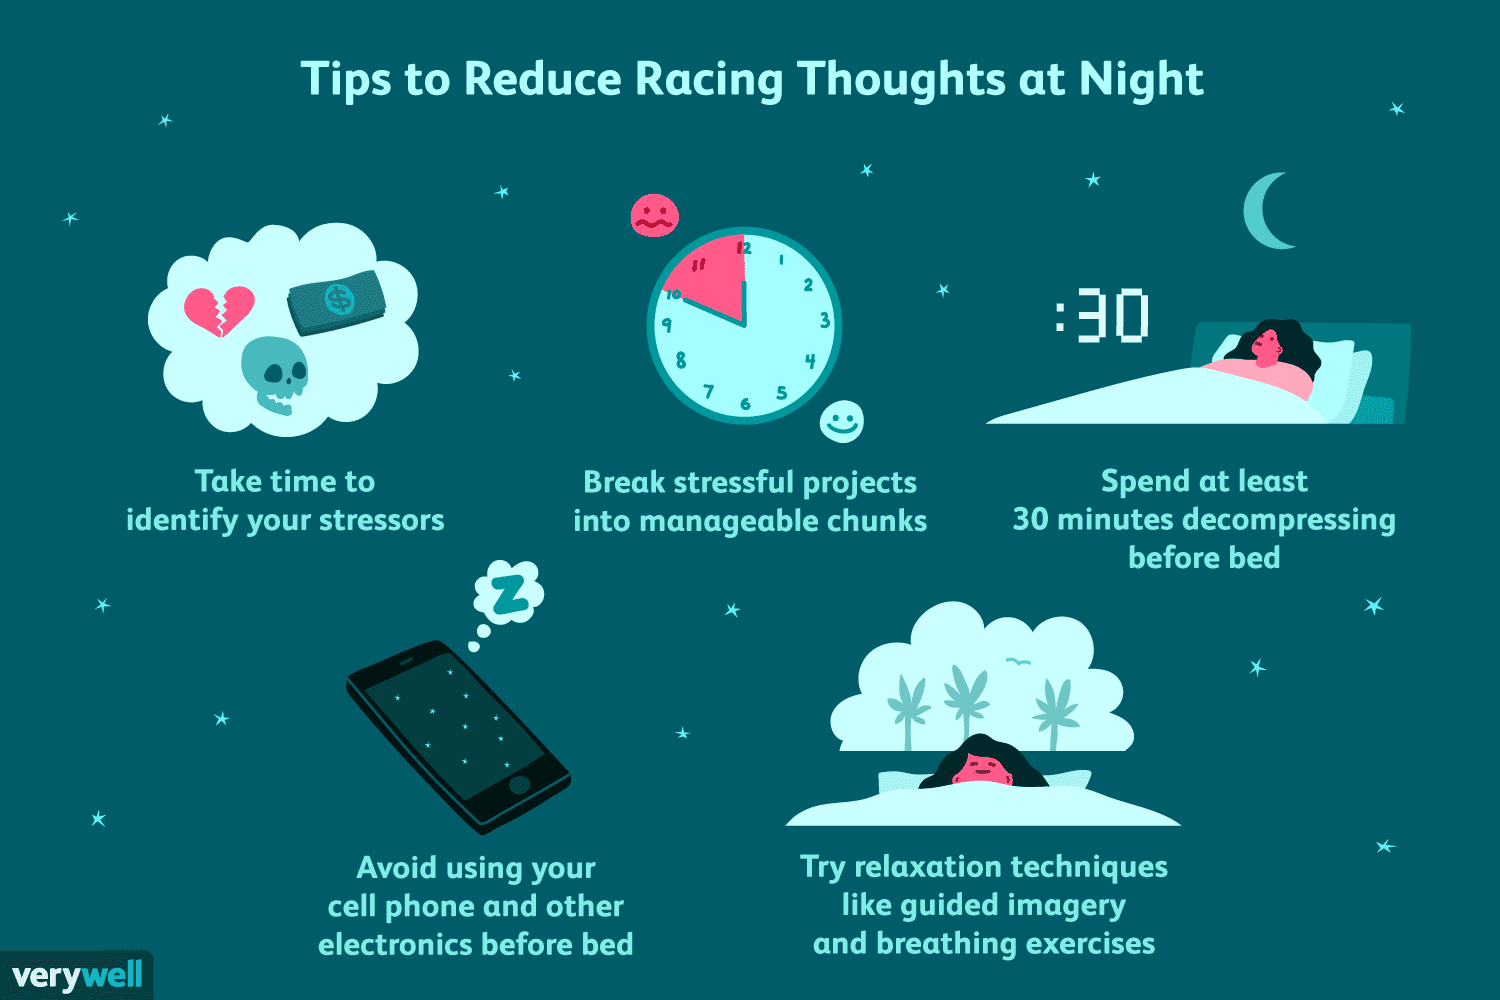 How to deal with racing thoughts before bedtime?